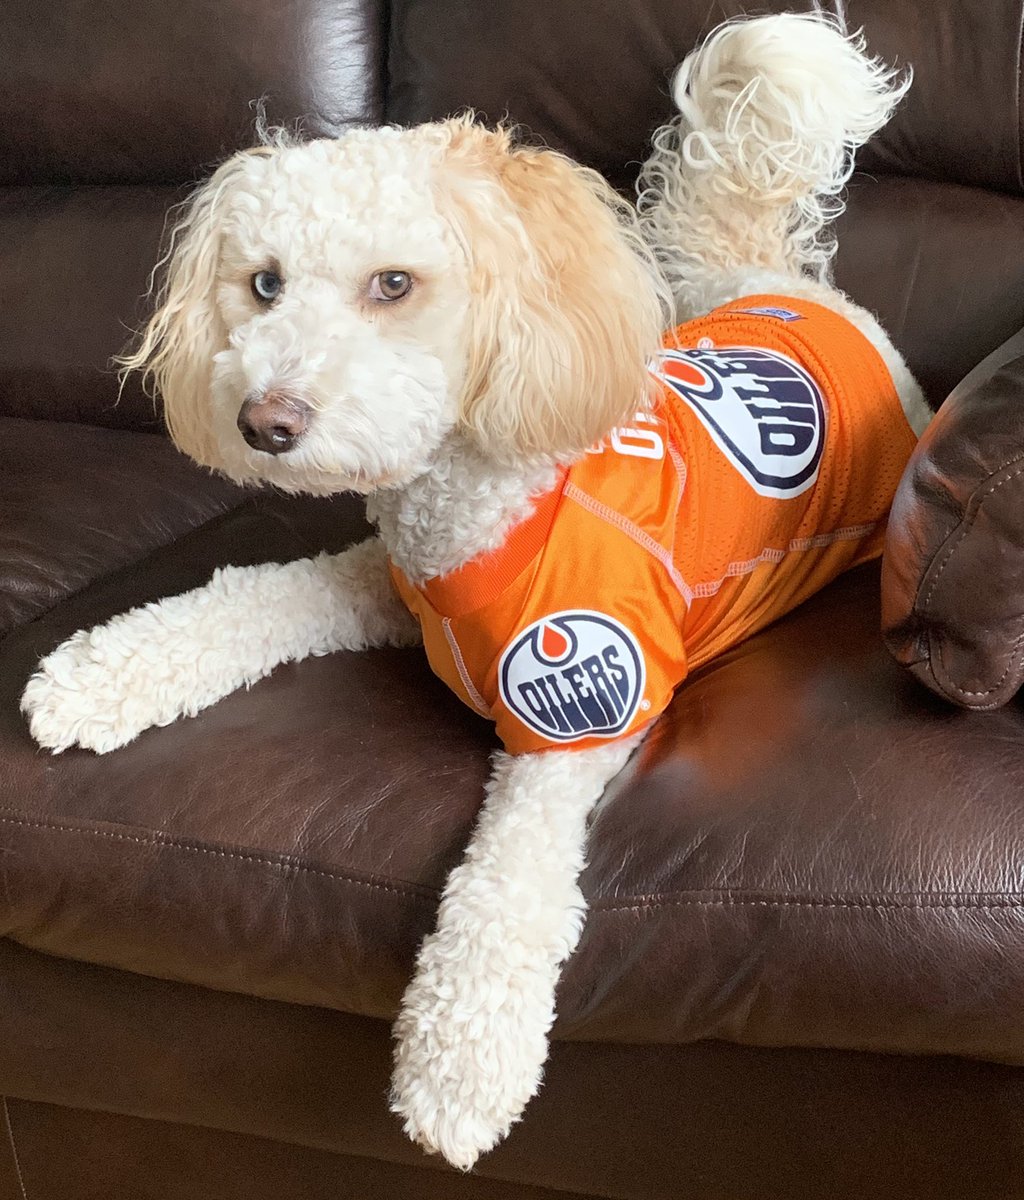 It’s #ThursdayThrowback and Game Day fur my @EdmontonOilers Cmon, let’s get er done! Game 1 round 3 🐶 #LetsGoOilers